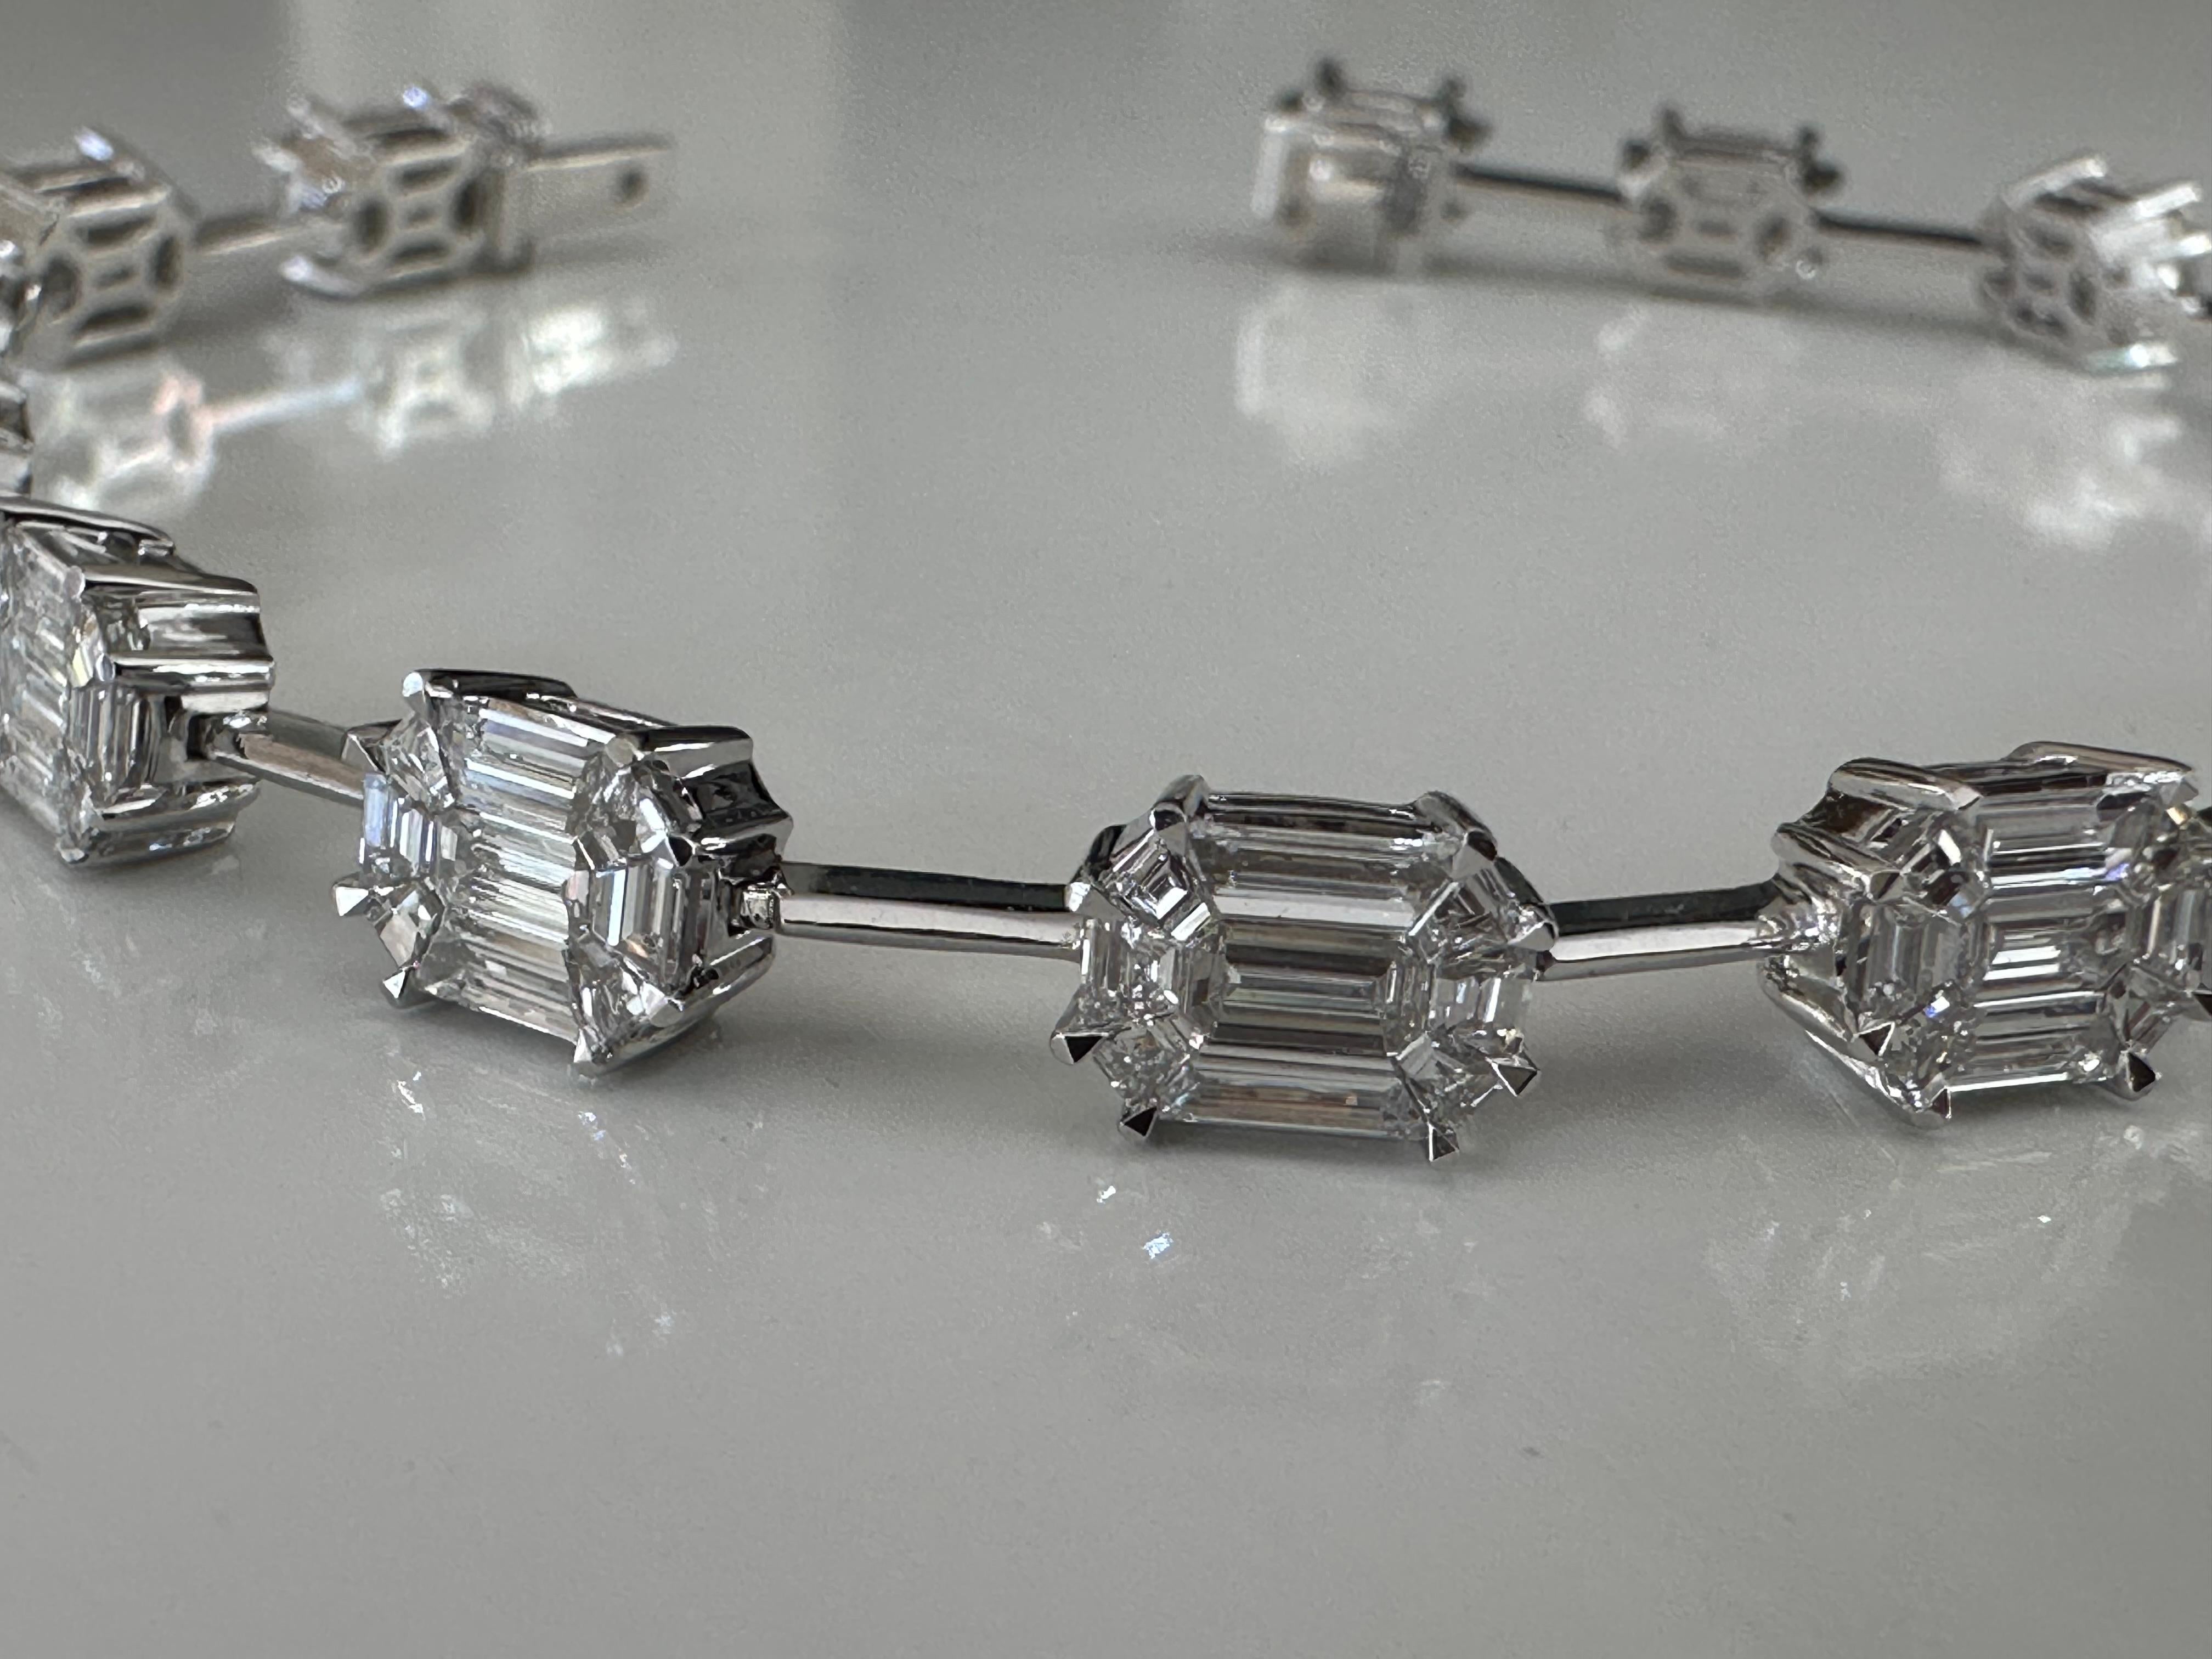 Handcrafted in 18K white gold, this elegant link bracelet features fifteen illusion emerald-cut diamonds (one hundred thirty-five stones in all), highlighting the special technique that uses smaller stones to create the illusion of a larger stone.